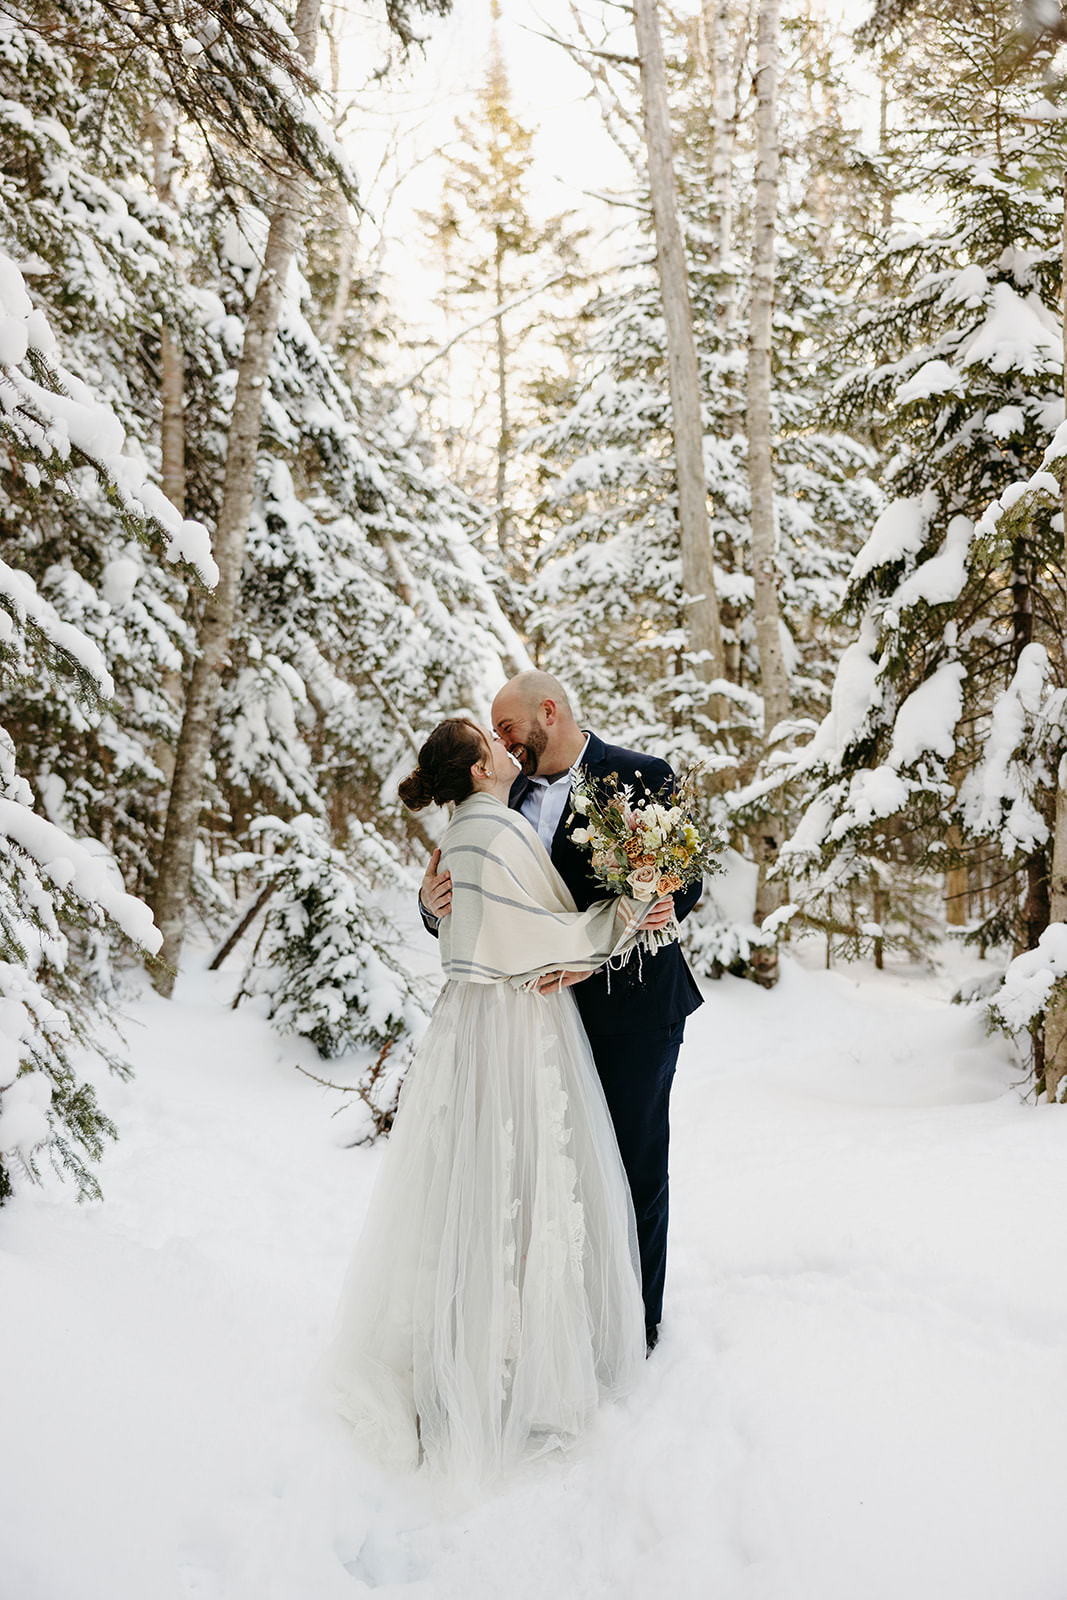 Winter elopement in the White Mountains of New Hampshire